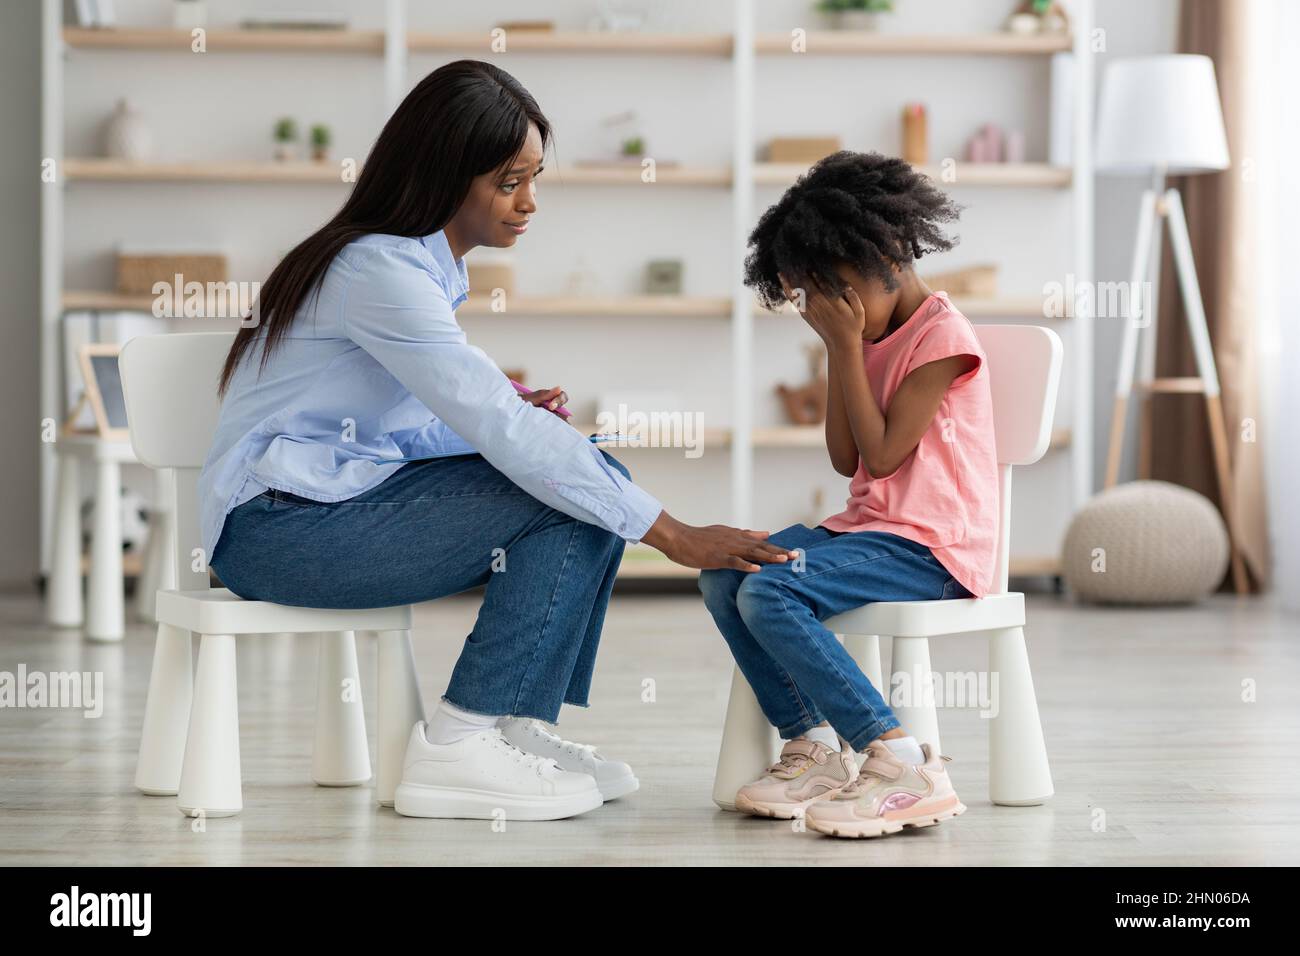 Distressed black kid crying at psychotherapy session Stock Photo